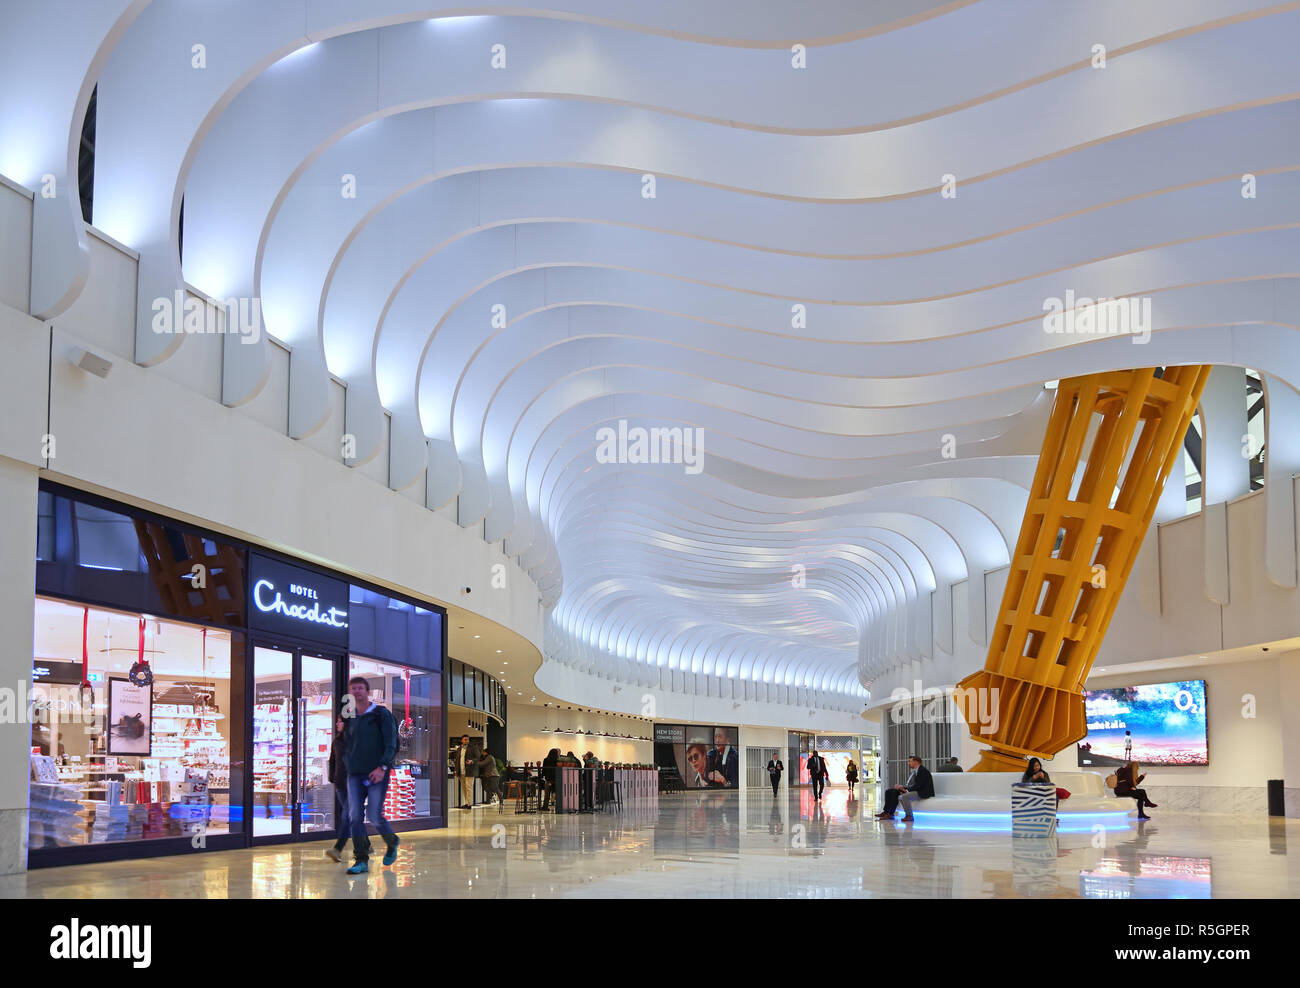 The Icon Outlet at the O2, London. A new designer shopping mall opened Autumn 2018. Developed by AEG and Crosstree Real Estate Partners. Stock Photo